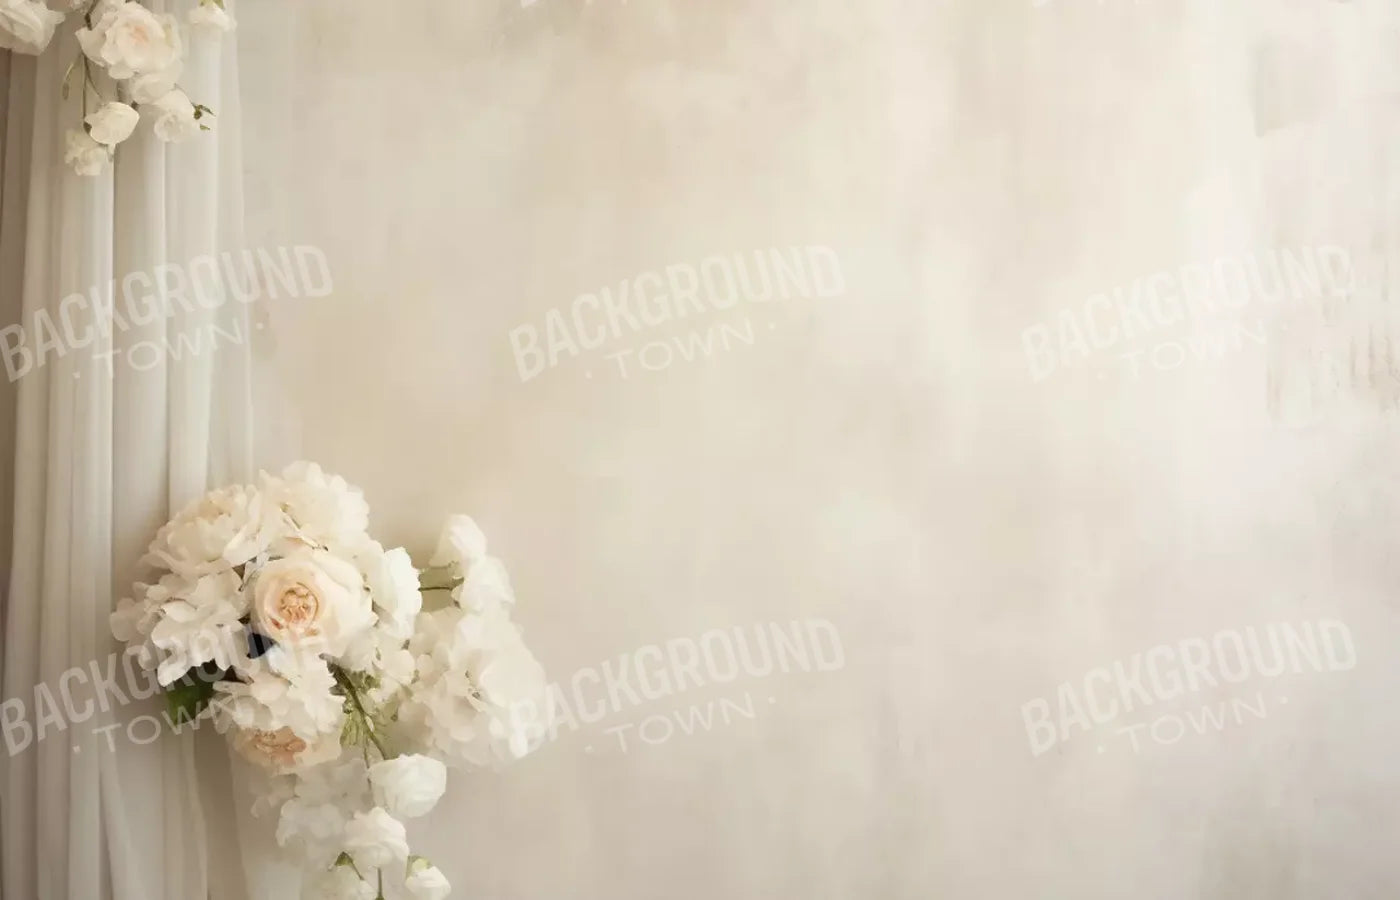 Plaster Wall With Florals 14’X9’ Ultracloth (168 X 108 Inch) Backdrop